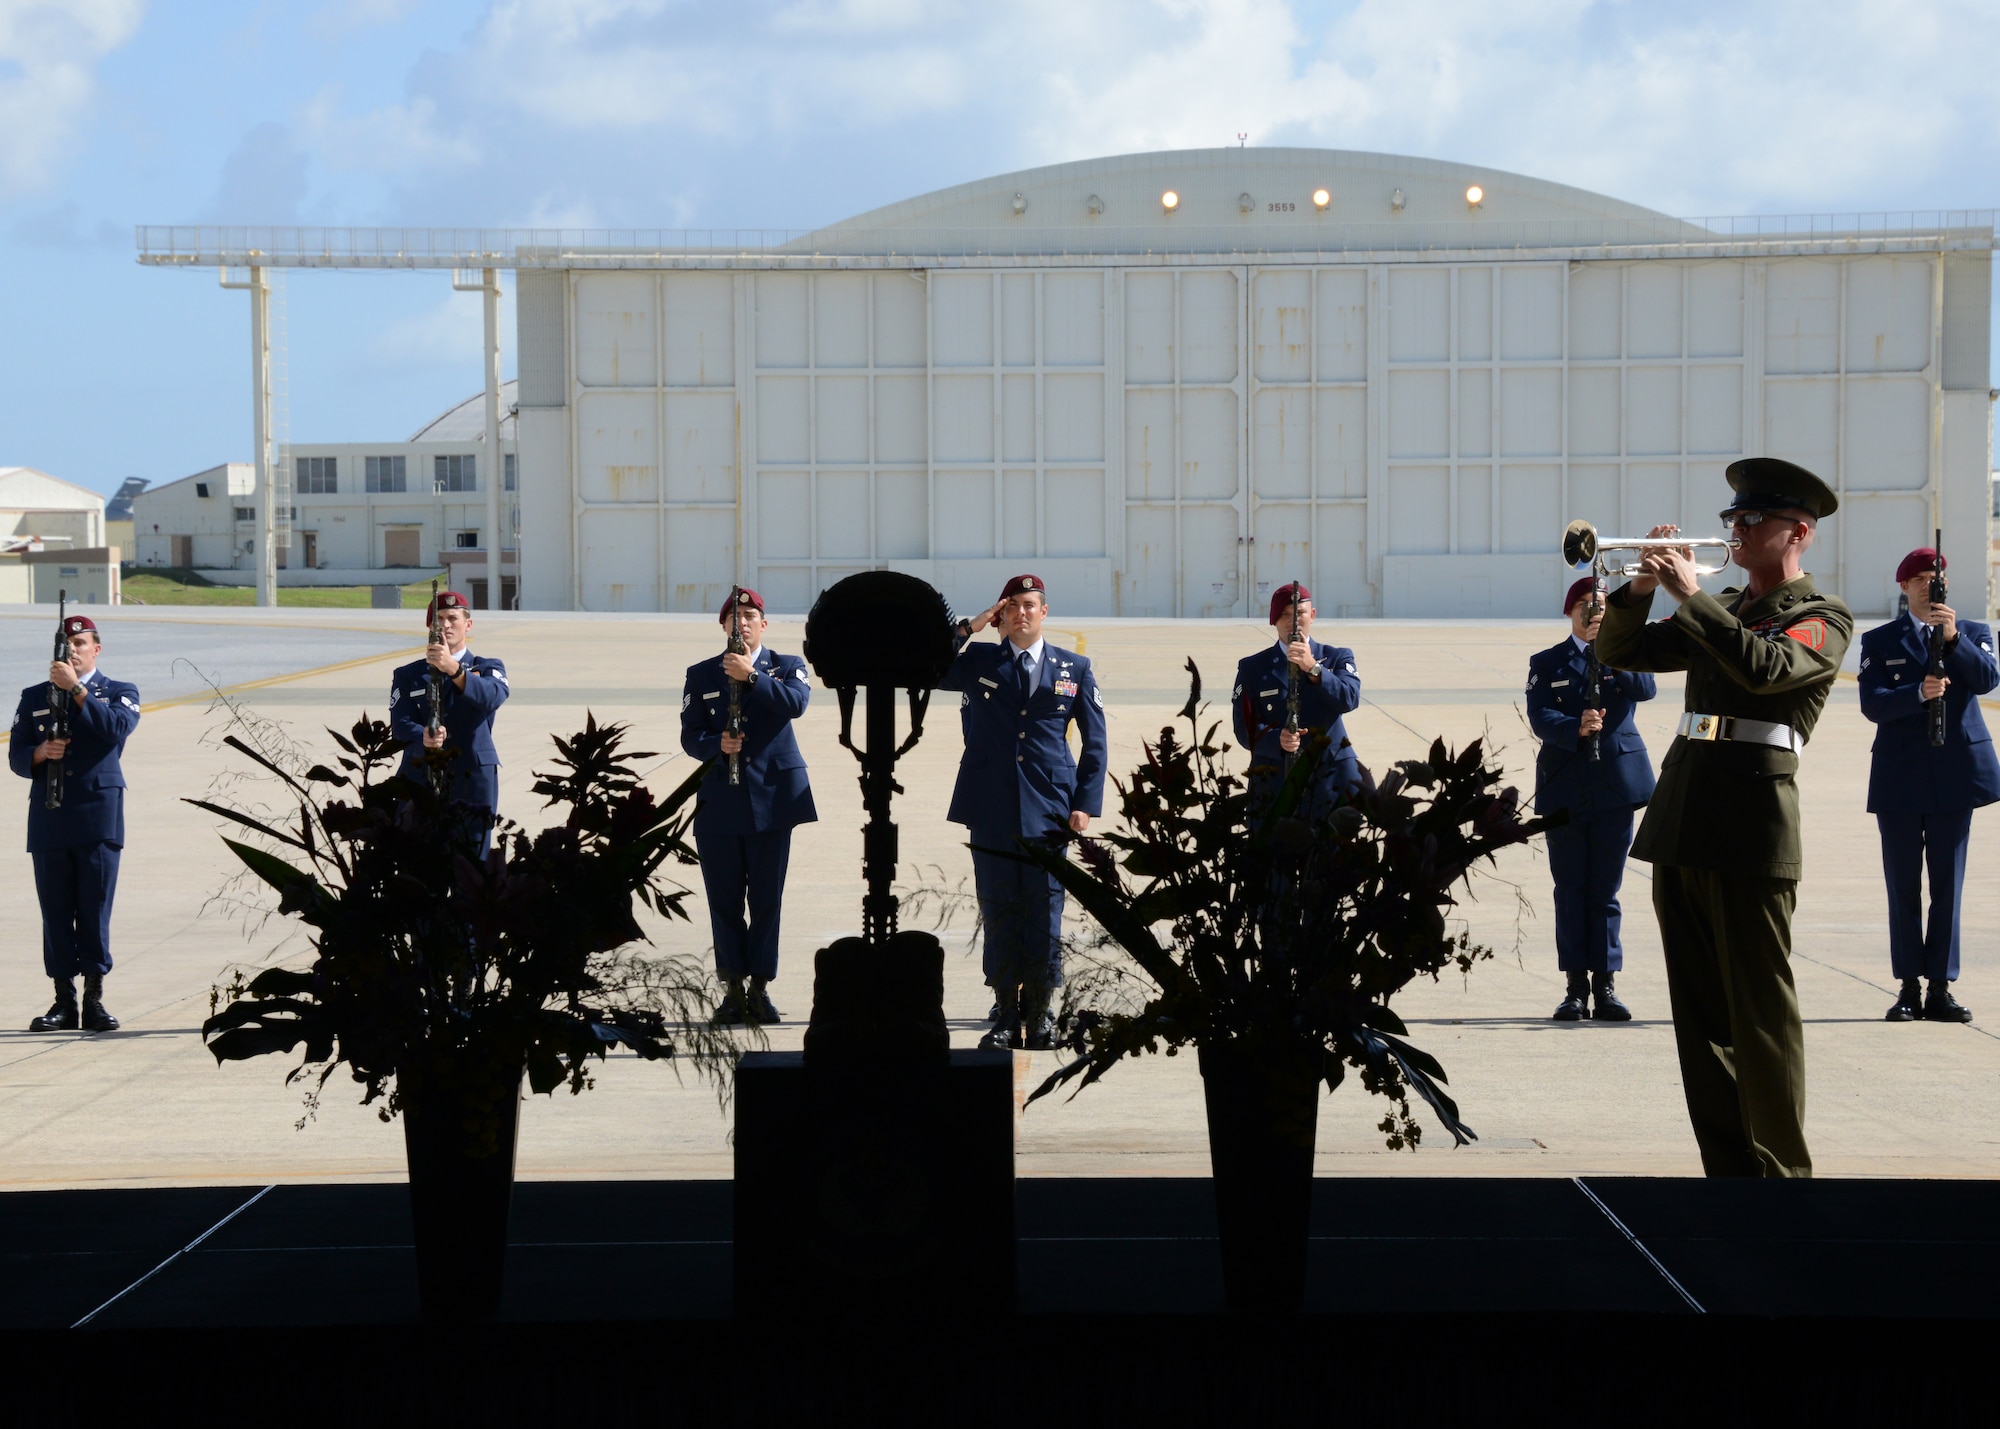 The firing party stands and salutes after conducting a three volley salute while a bugler plays Taps during a memorial service held for Tech. Sgt. Sean Barton Nov. 25, 2014 at Kadena Air Base, Japan.  Barton, a 320th Special Tactics Squadron pararescueman, died Oct. 30 from injuries sustained after a rappelling incident during a joint exercise training event near Kathmandu, Nepal.  (U.S. Air Force photo by Tech. Sgt. Kristine Dreyer)